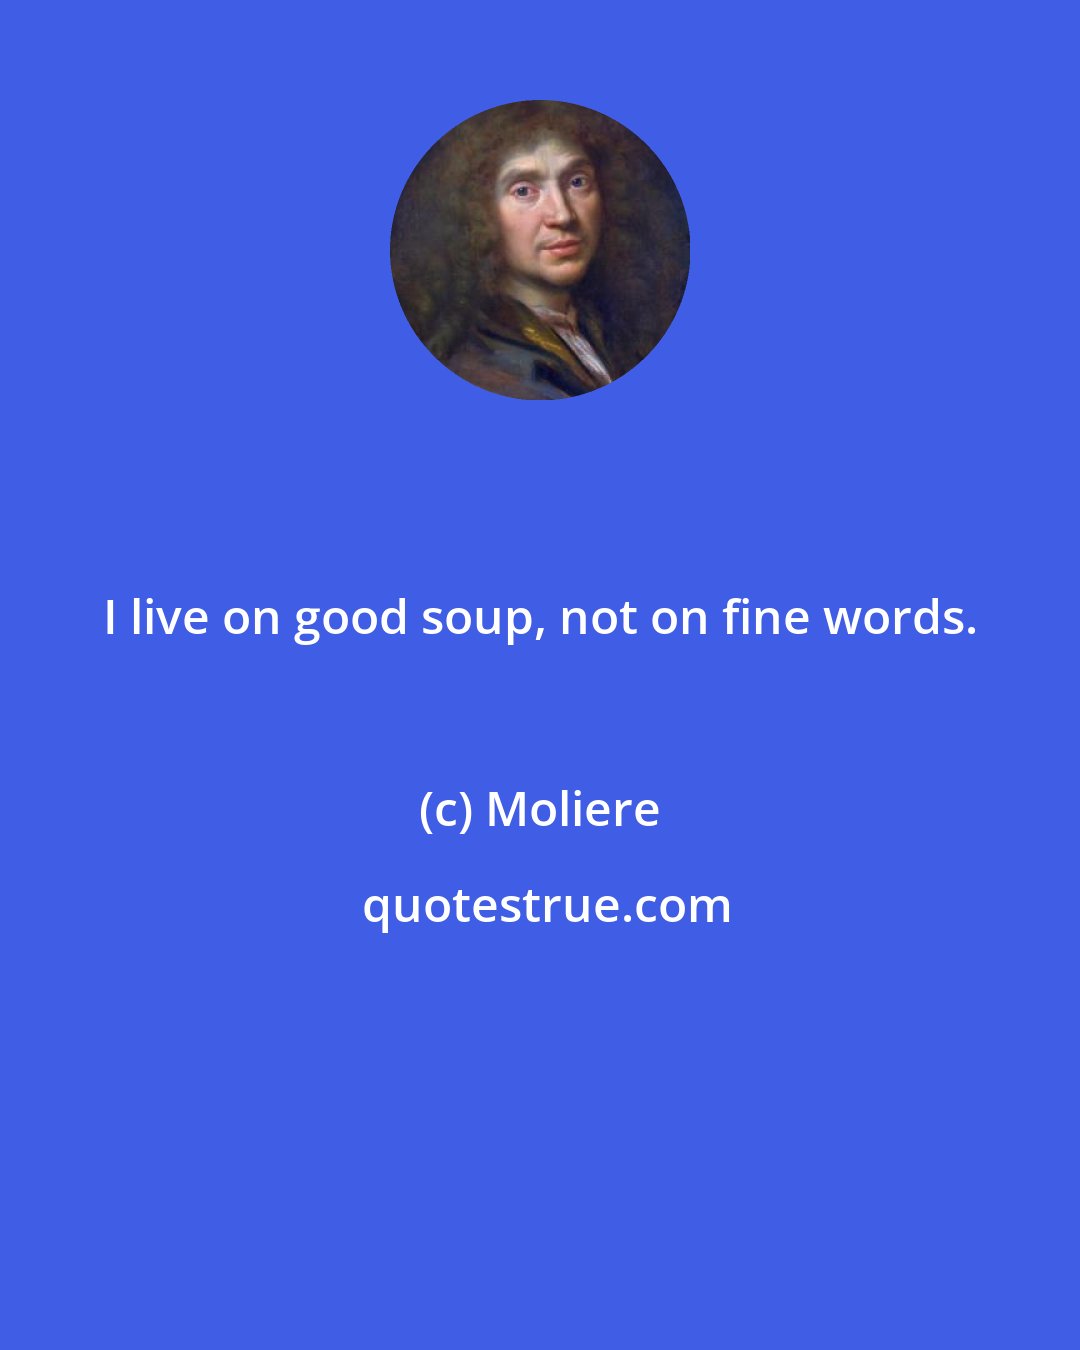 Moliere: I live on good soup, not on fine words.